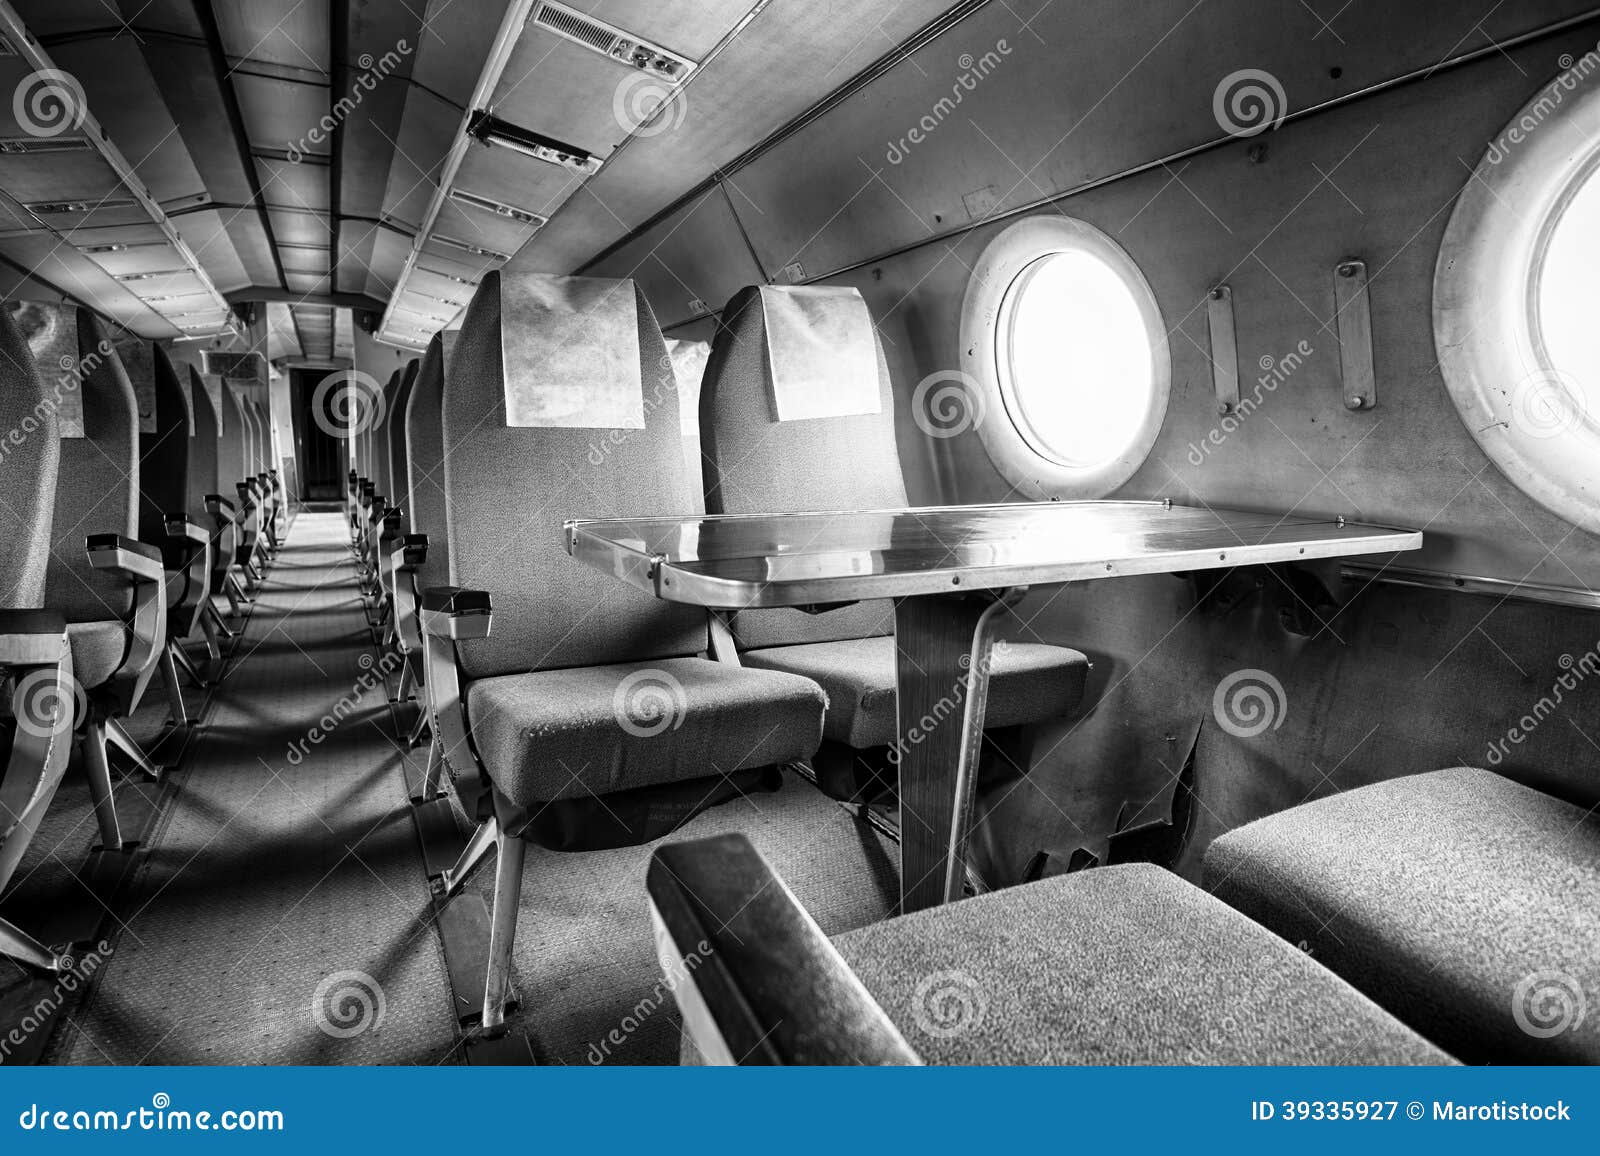 old outdated passenger air inside